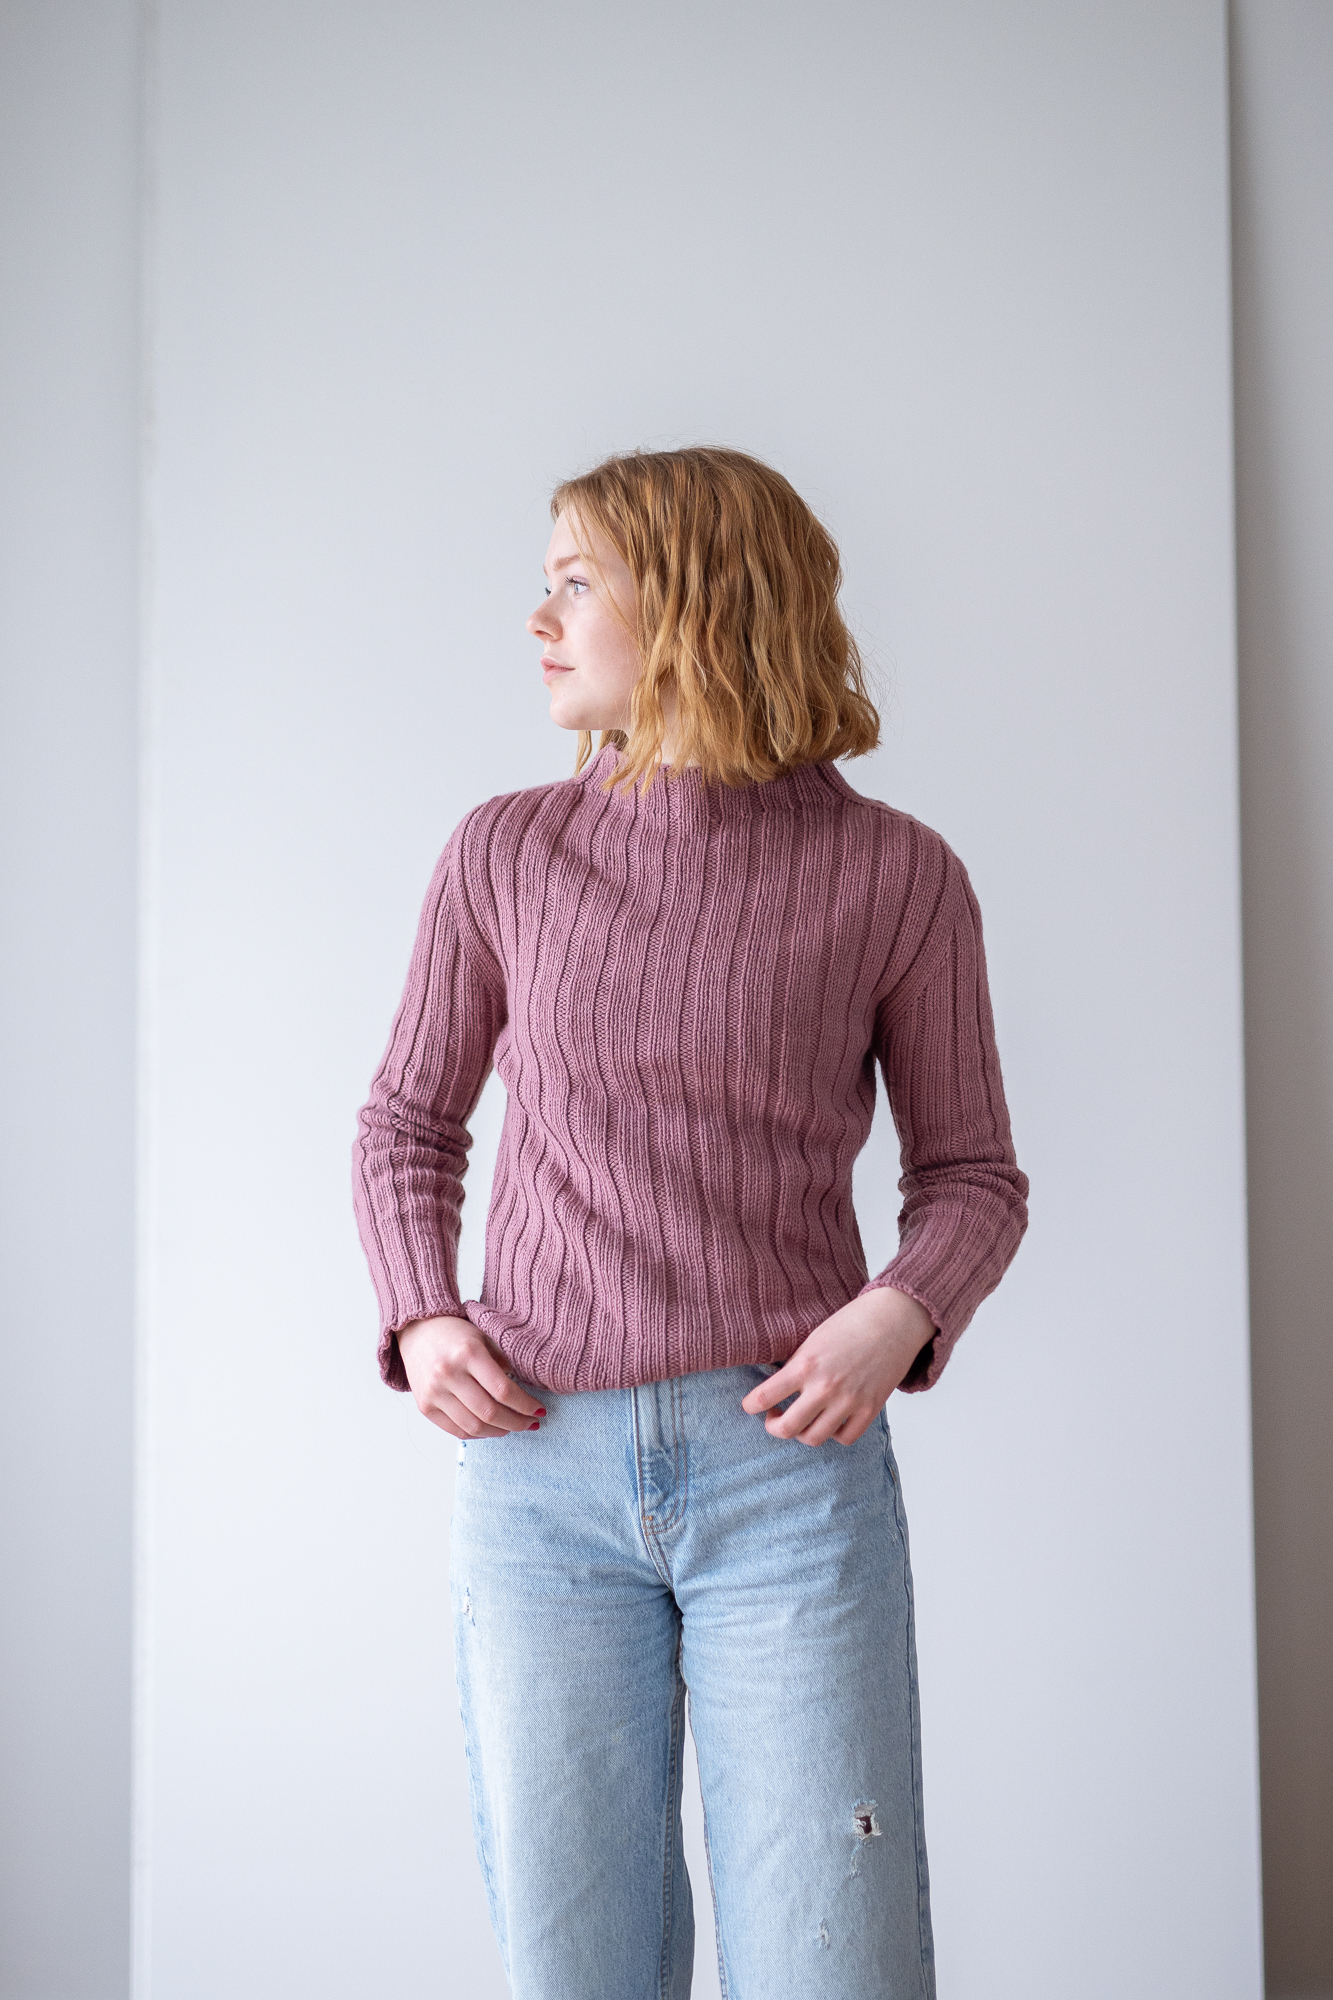  - Cést la vie sweater | Womens ribbed sweater| Knitting kit - by HipKnitShop - 08/03/2021